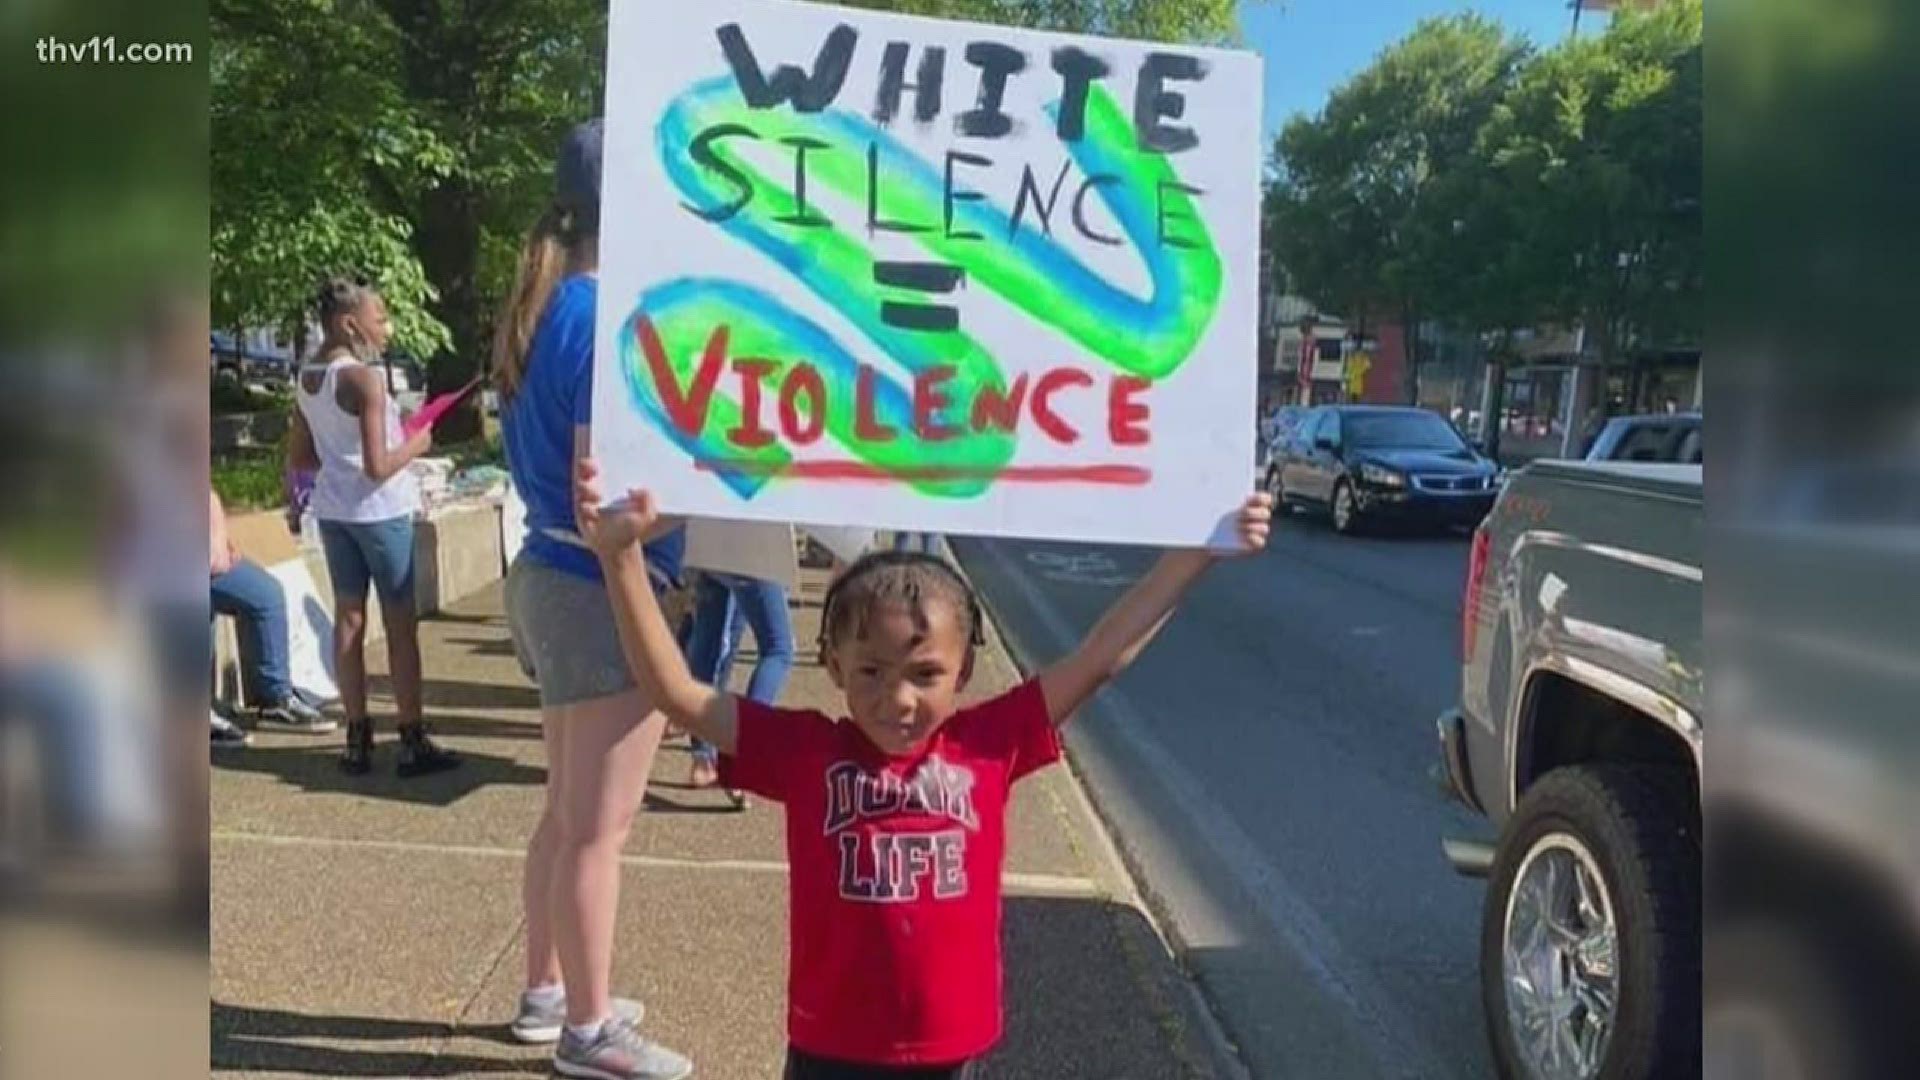 T graphic videos, protests, messages can be overwhelming, but there's no escaping it. So how do you talk about racism and social injustice with your kids?